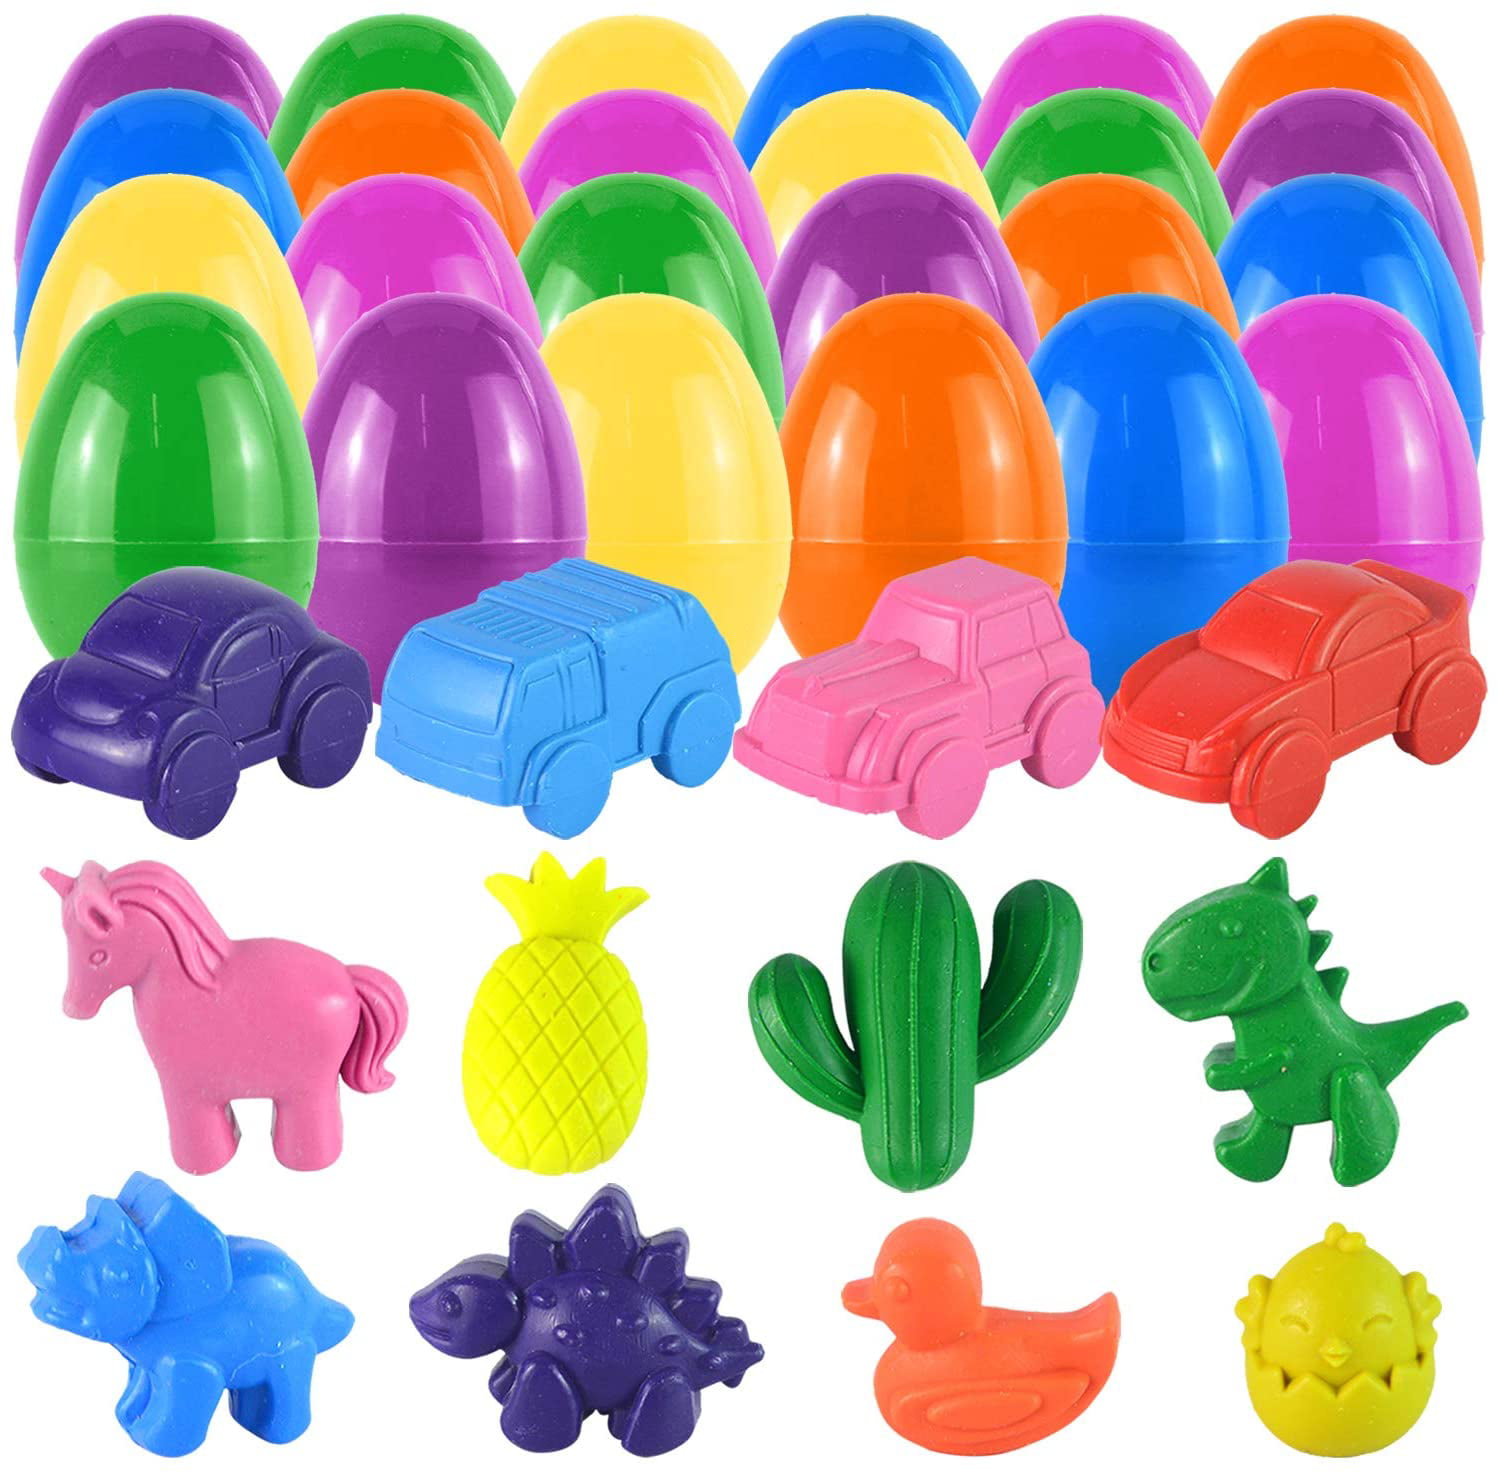 24 Cute Animal Crayons Rainbow Stocking Stuffer Party Favor Novelty Crayons